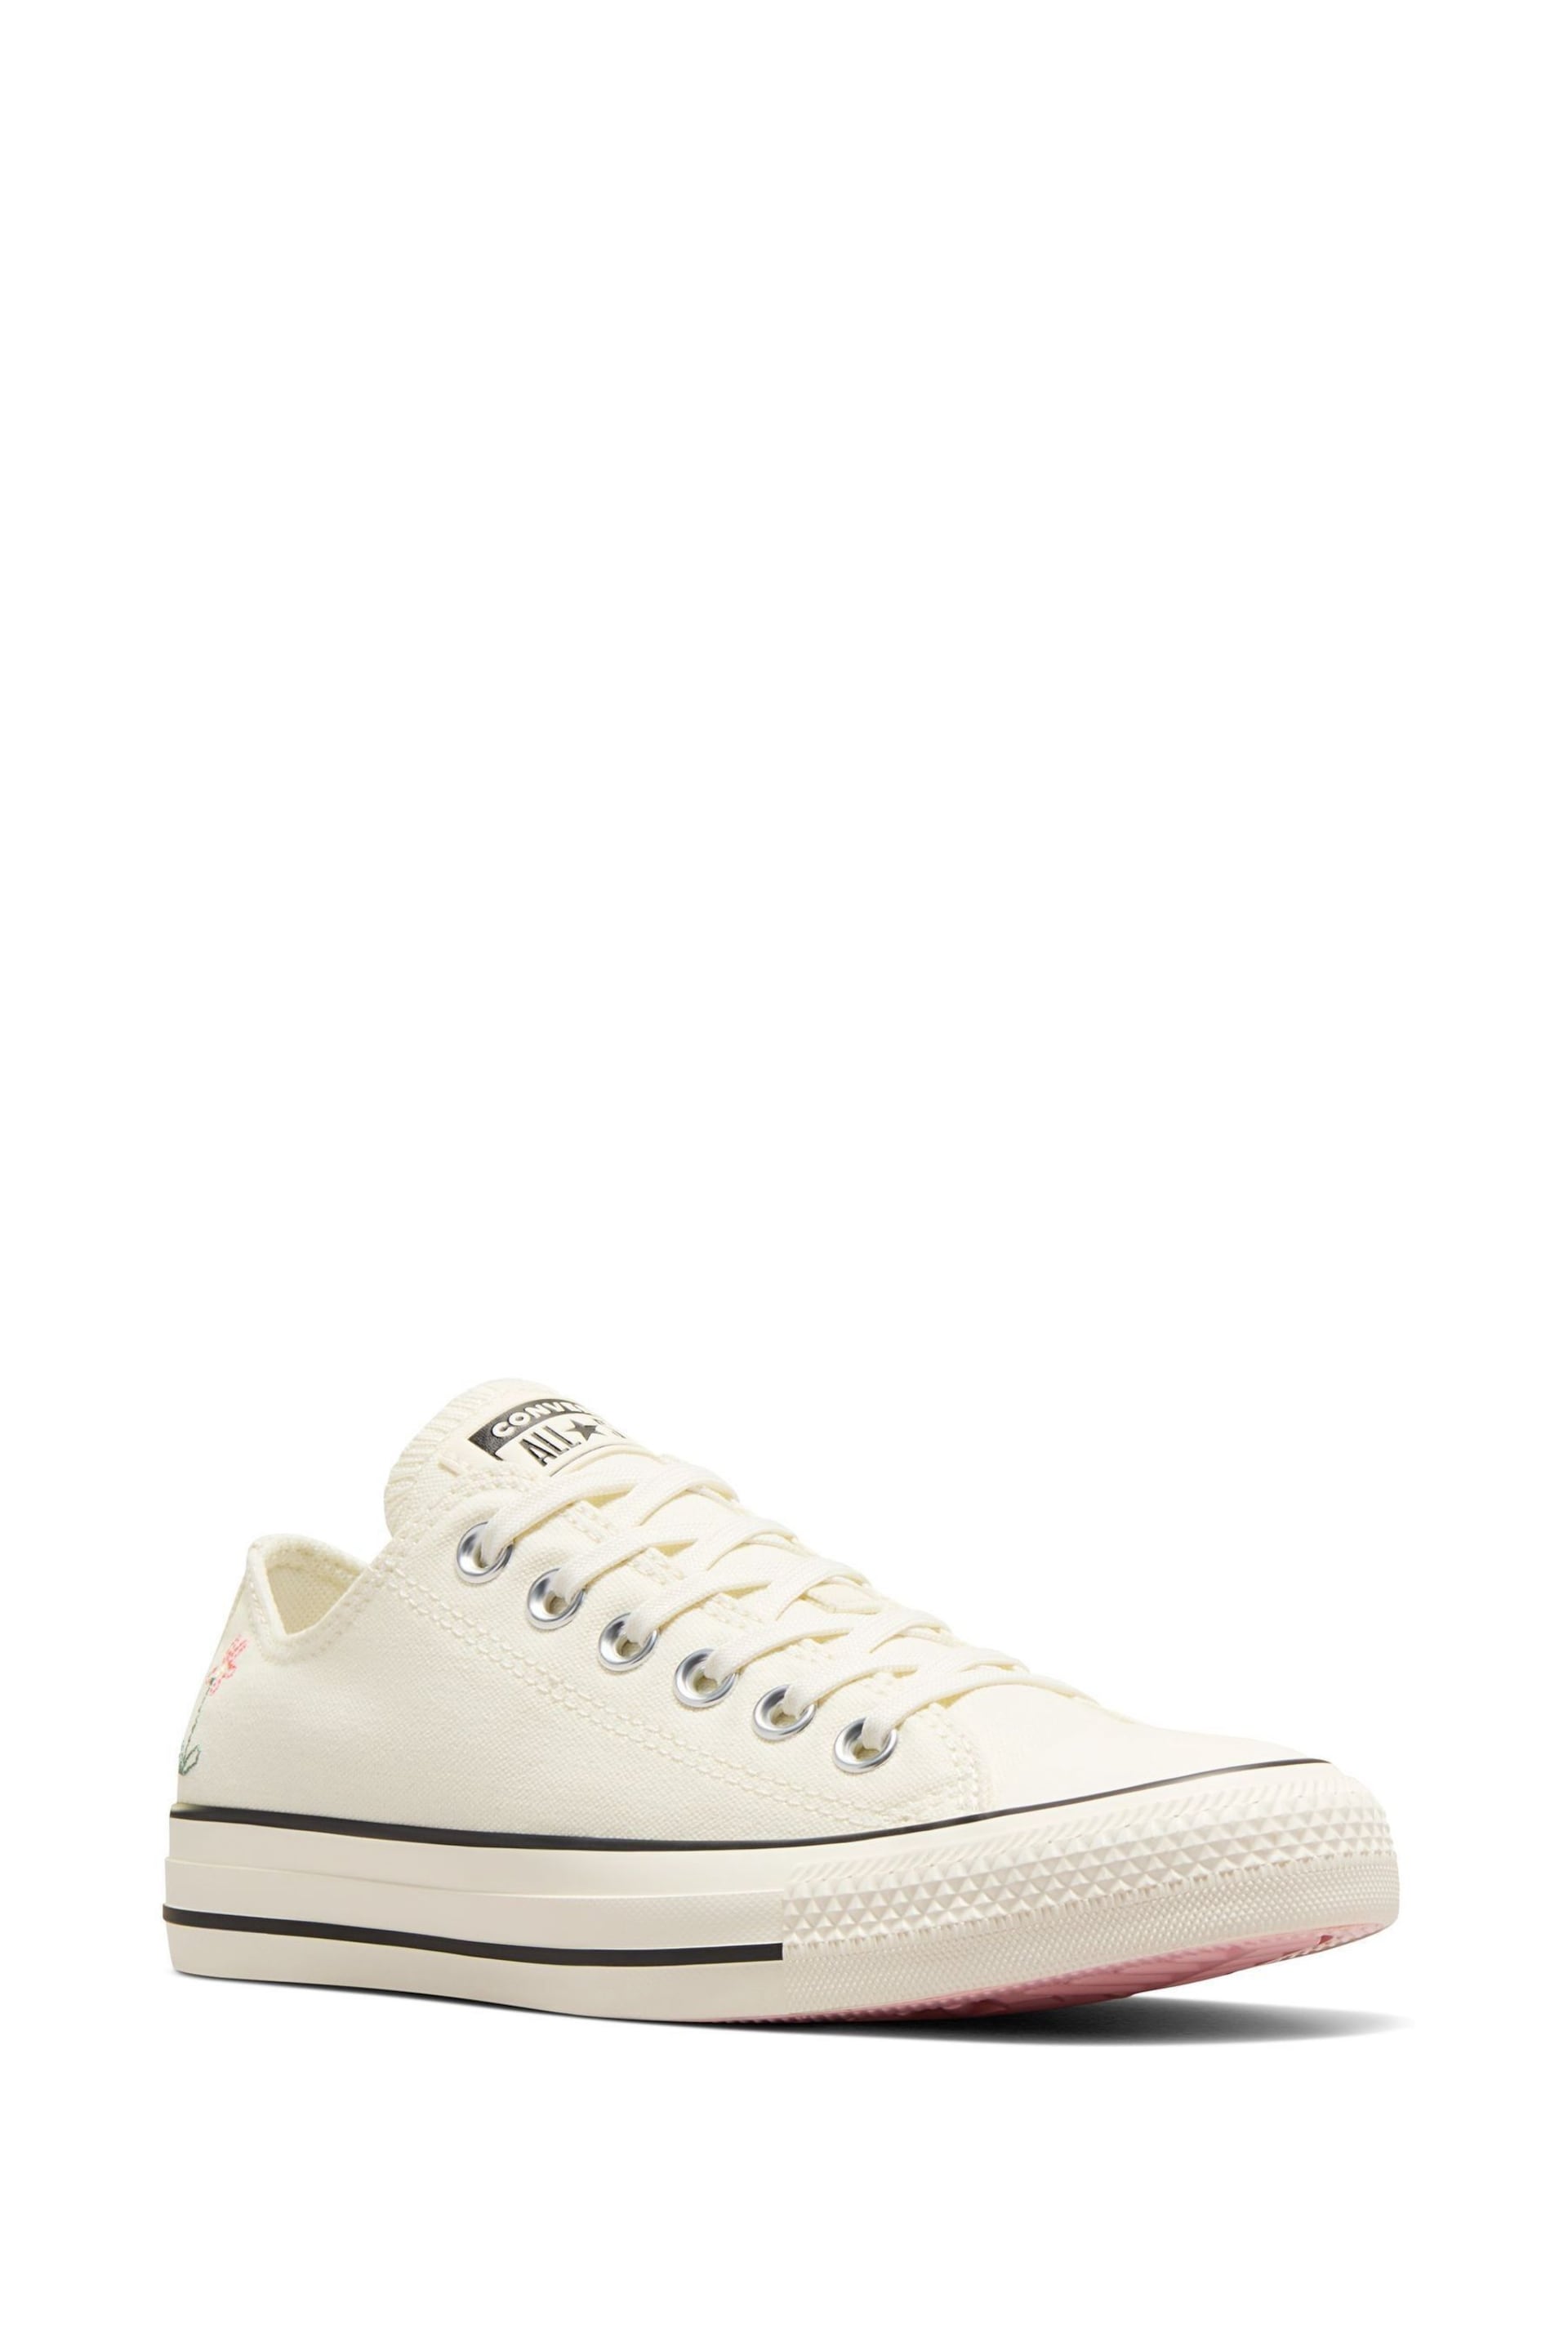 Converse Cream Chuck Taylor All Star Ox Trainers - Image 11 of 11